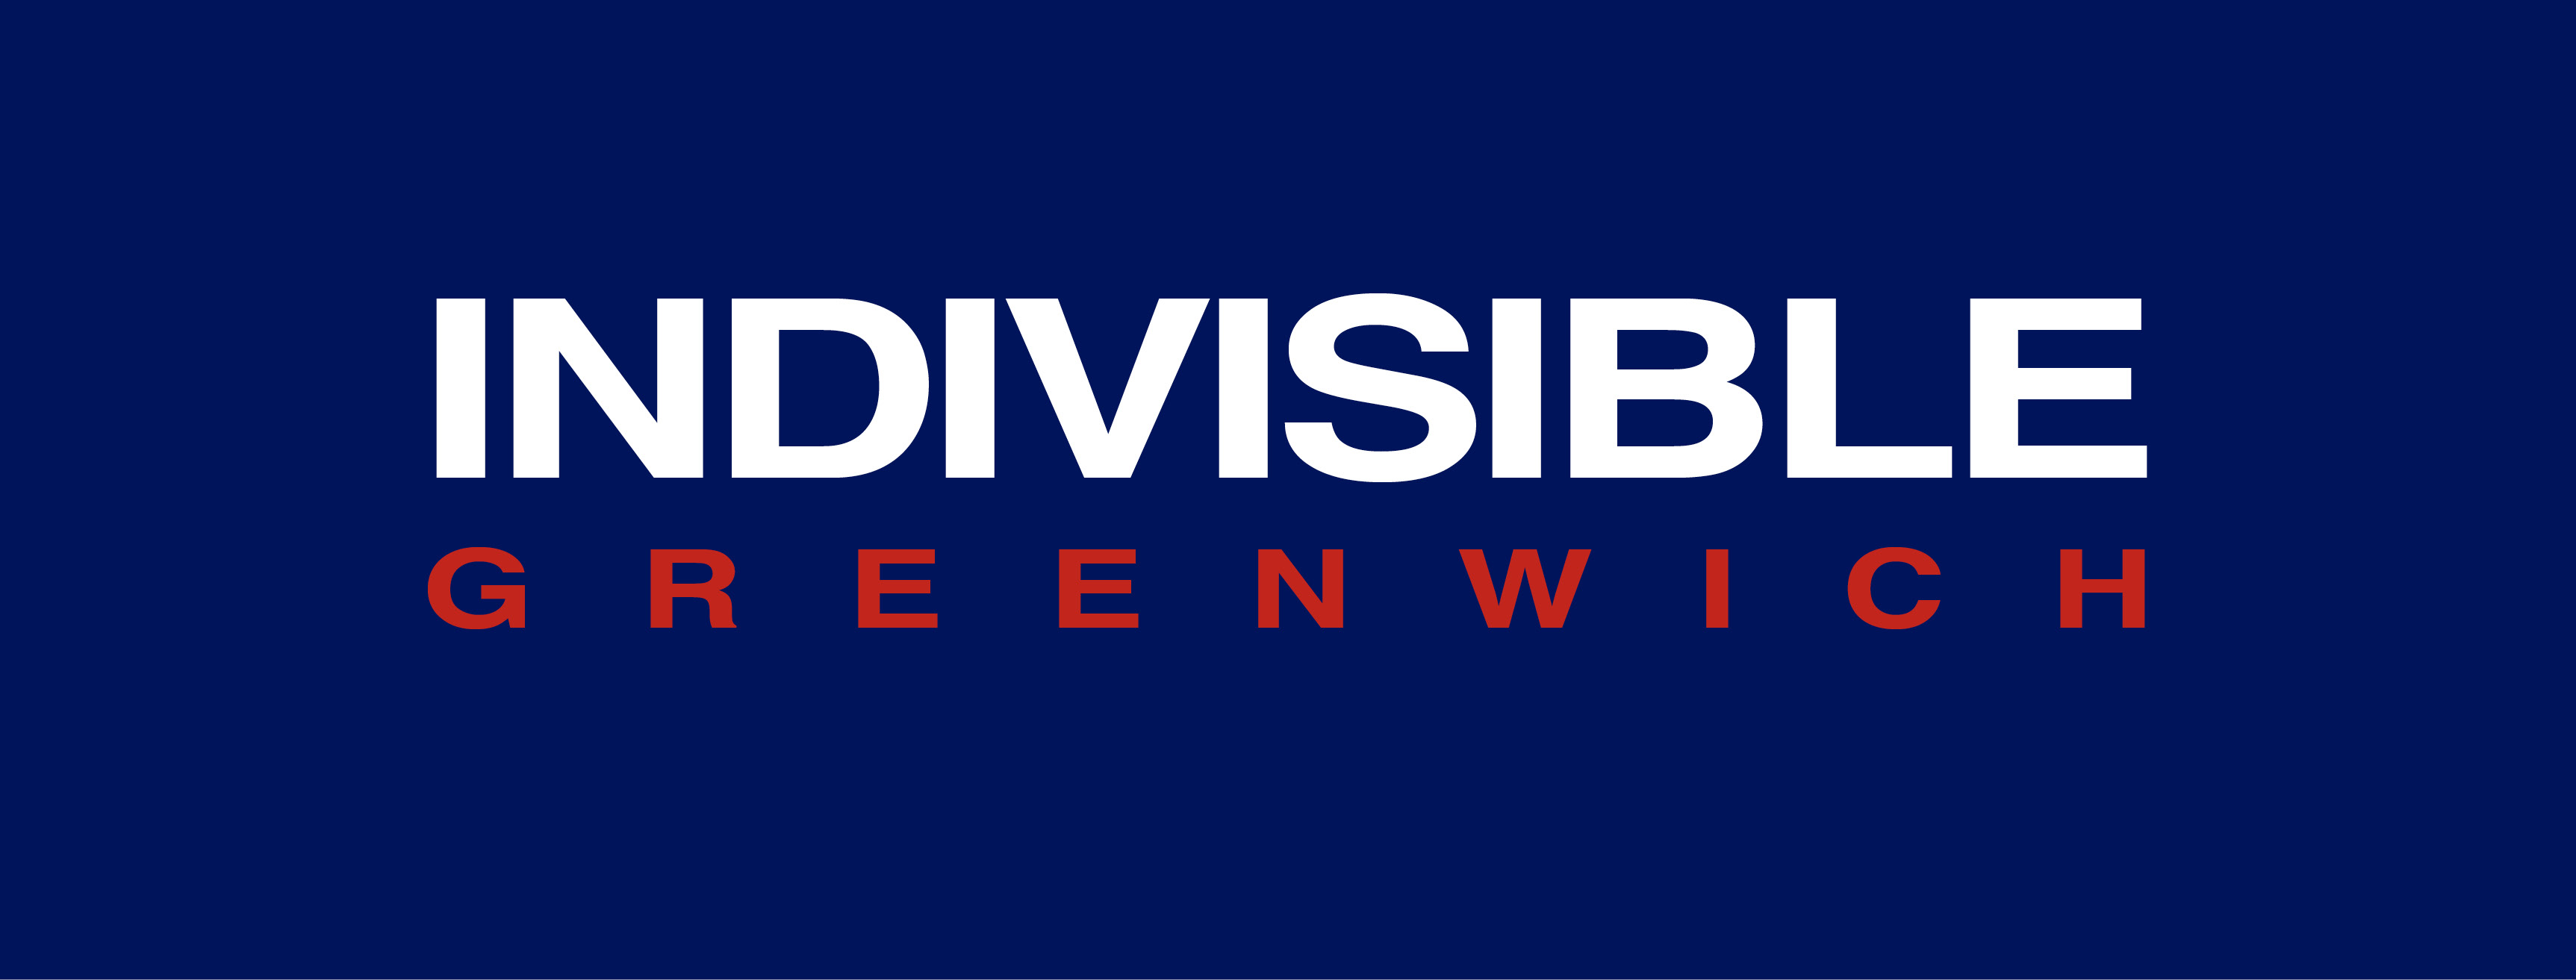 Indivisible Greenwich logo